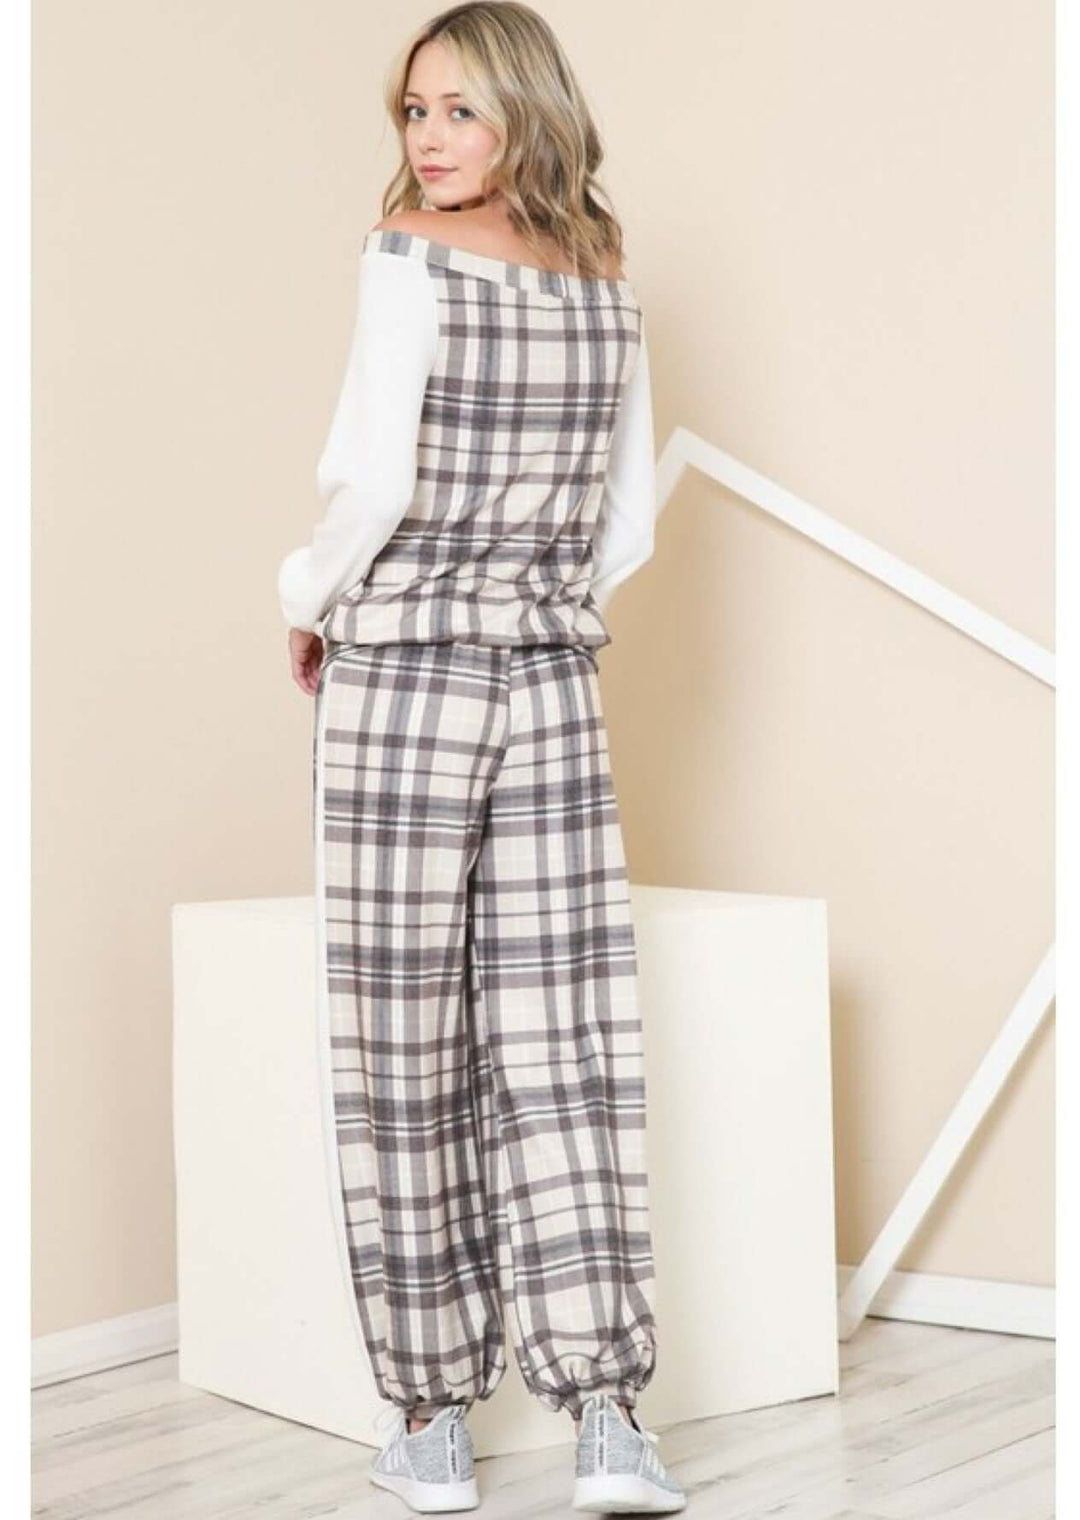 USA Made Women's Off the Shoulder Plaid Buttery Soft Brushed Hacci Pajama Set in Cream, Tan & Brown Plaid Design | Classy Cozy Cool Women's Made in America Boutique